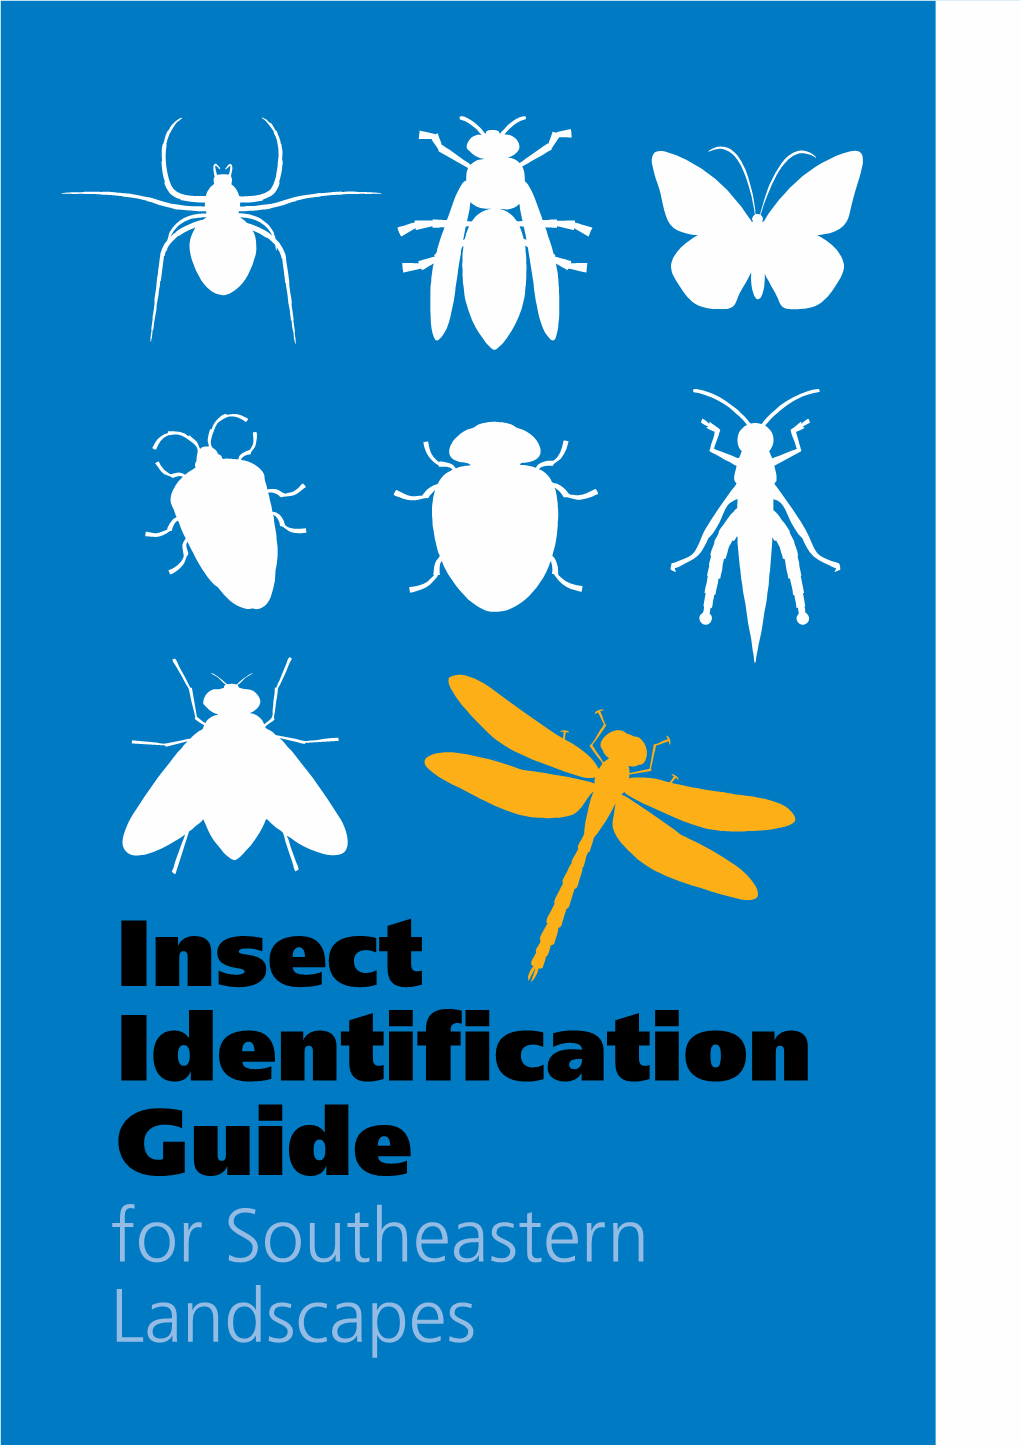 Insect Identification Guide for Southeastern Landscapes